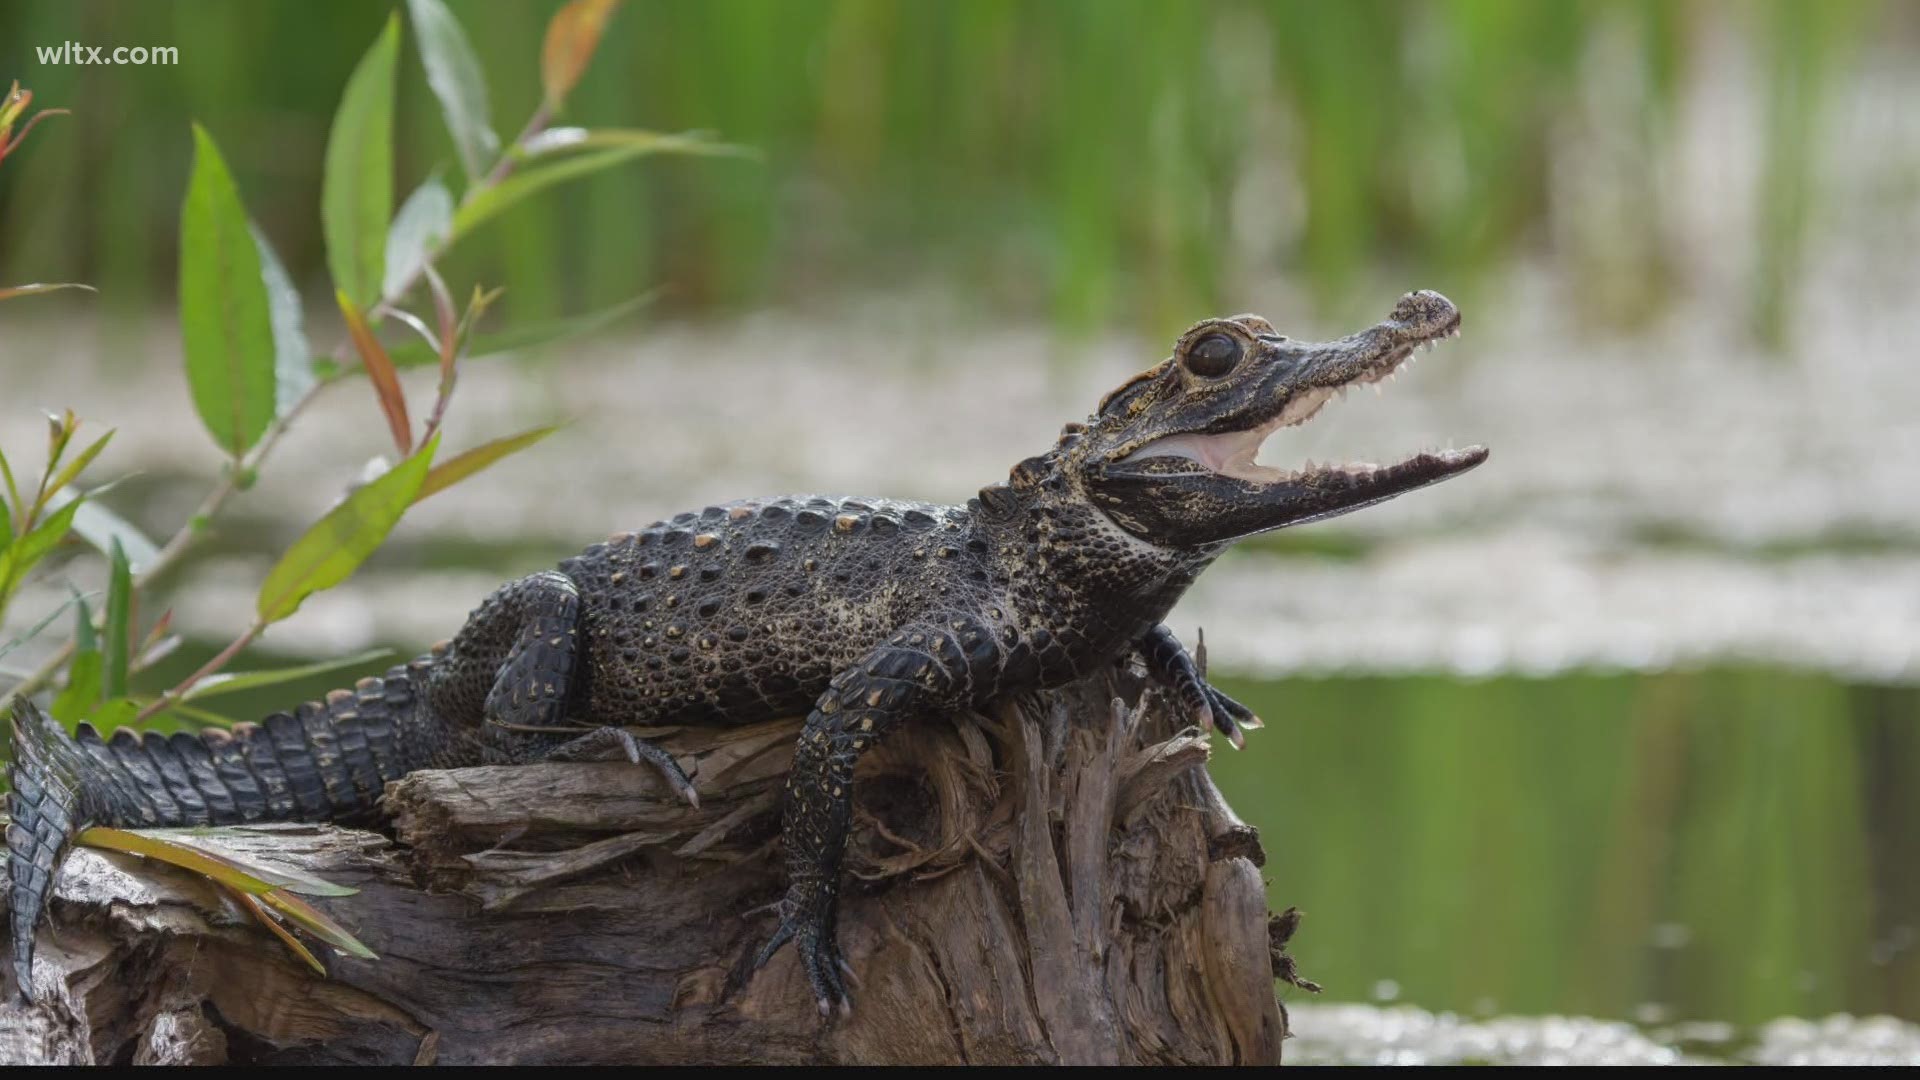 With a possible sighting of an alligator or caiman, we learn the difference.